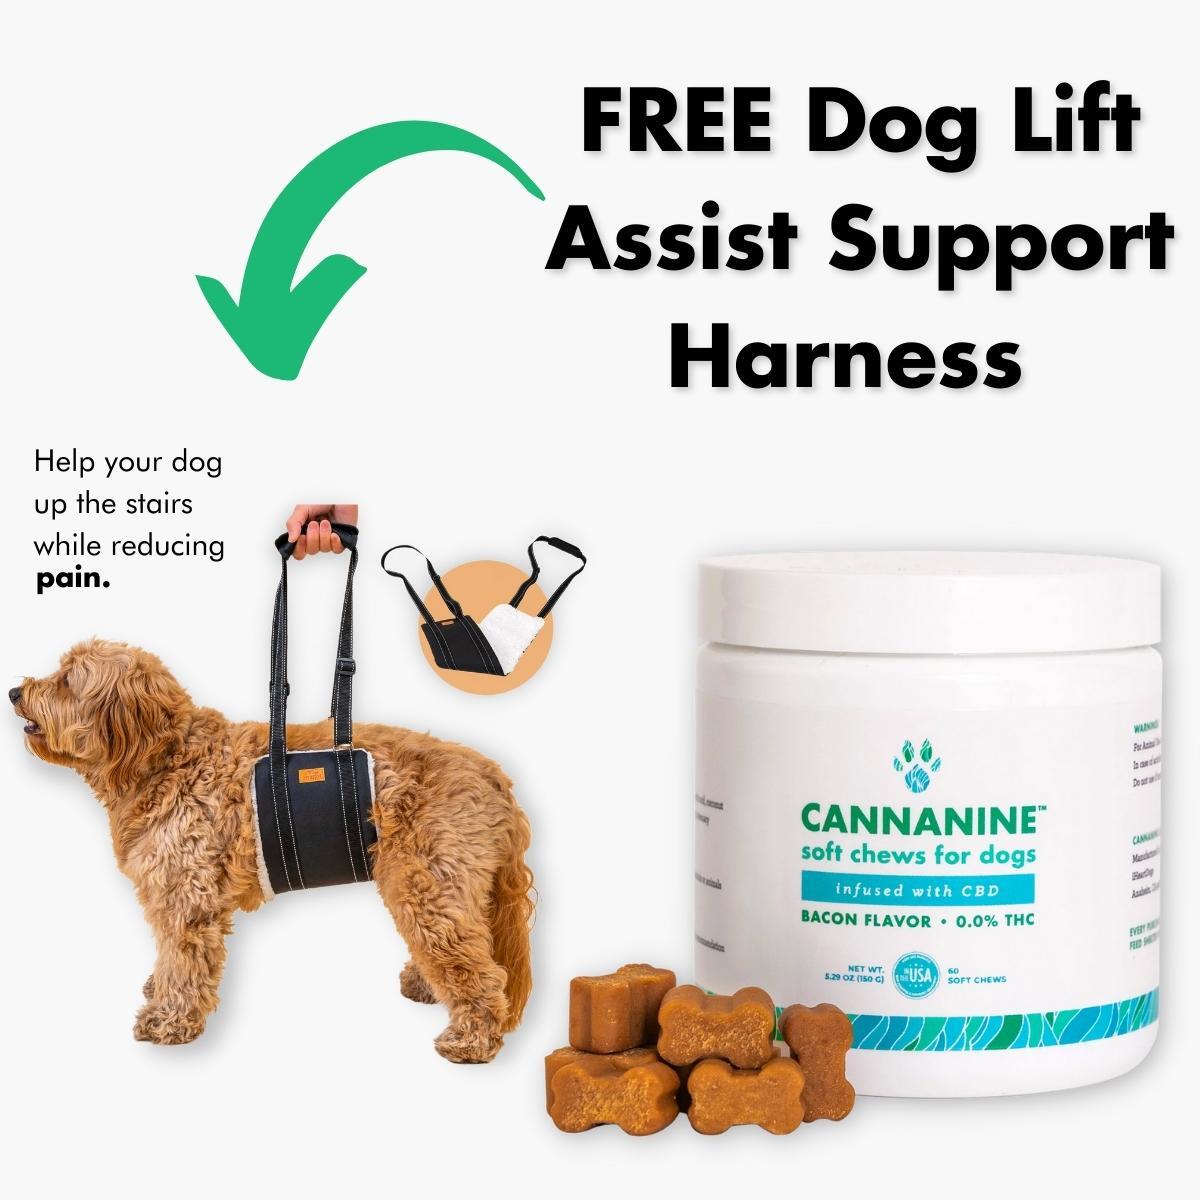 FREE Dog Lift Assist Support Harness – For Senior Dogs, Pet Support & Rehabilitation Sling Lift  With Purchase of Bacon Flavored CBD Soft Chews For Dogs 300 mg.-  60 ct.